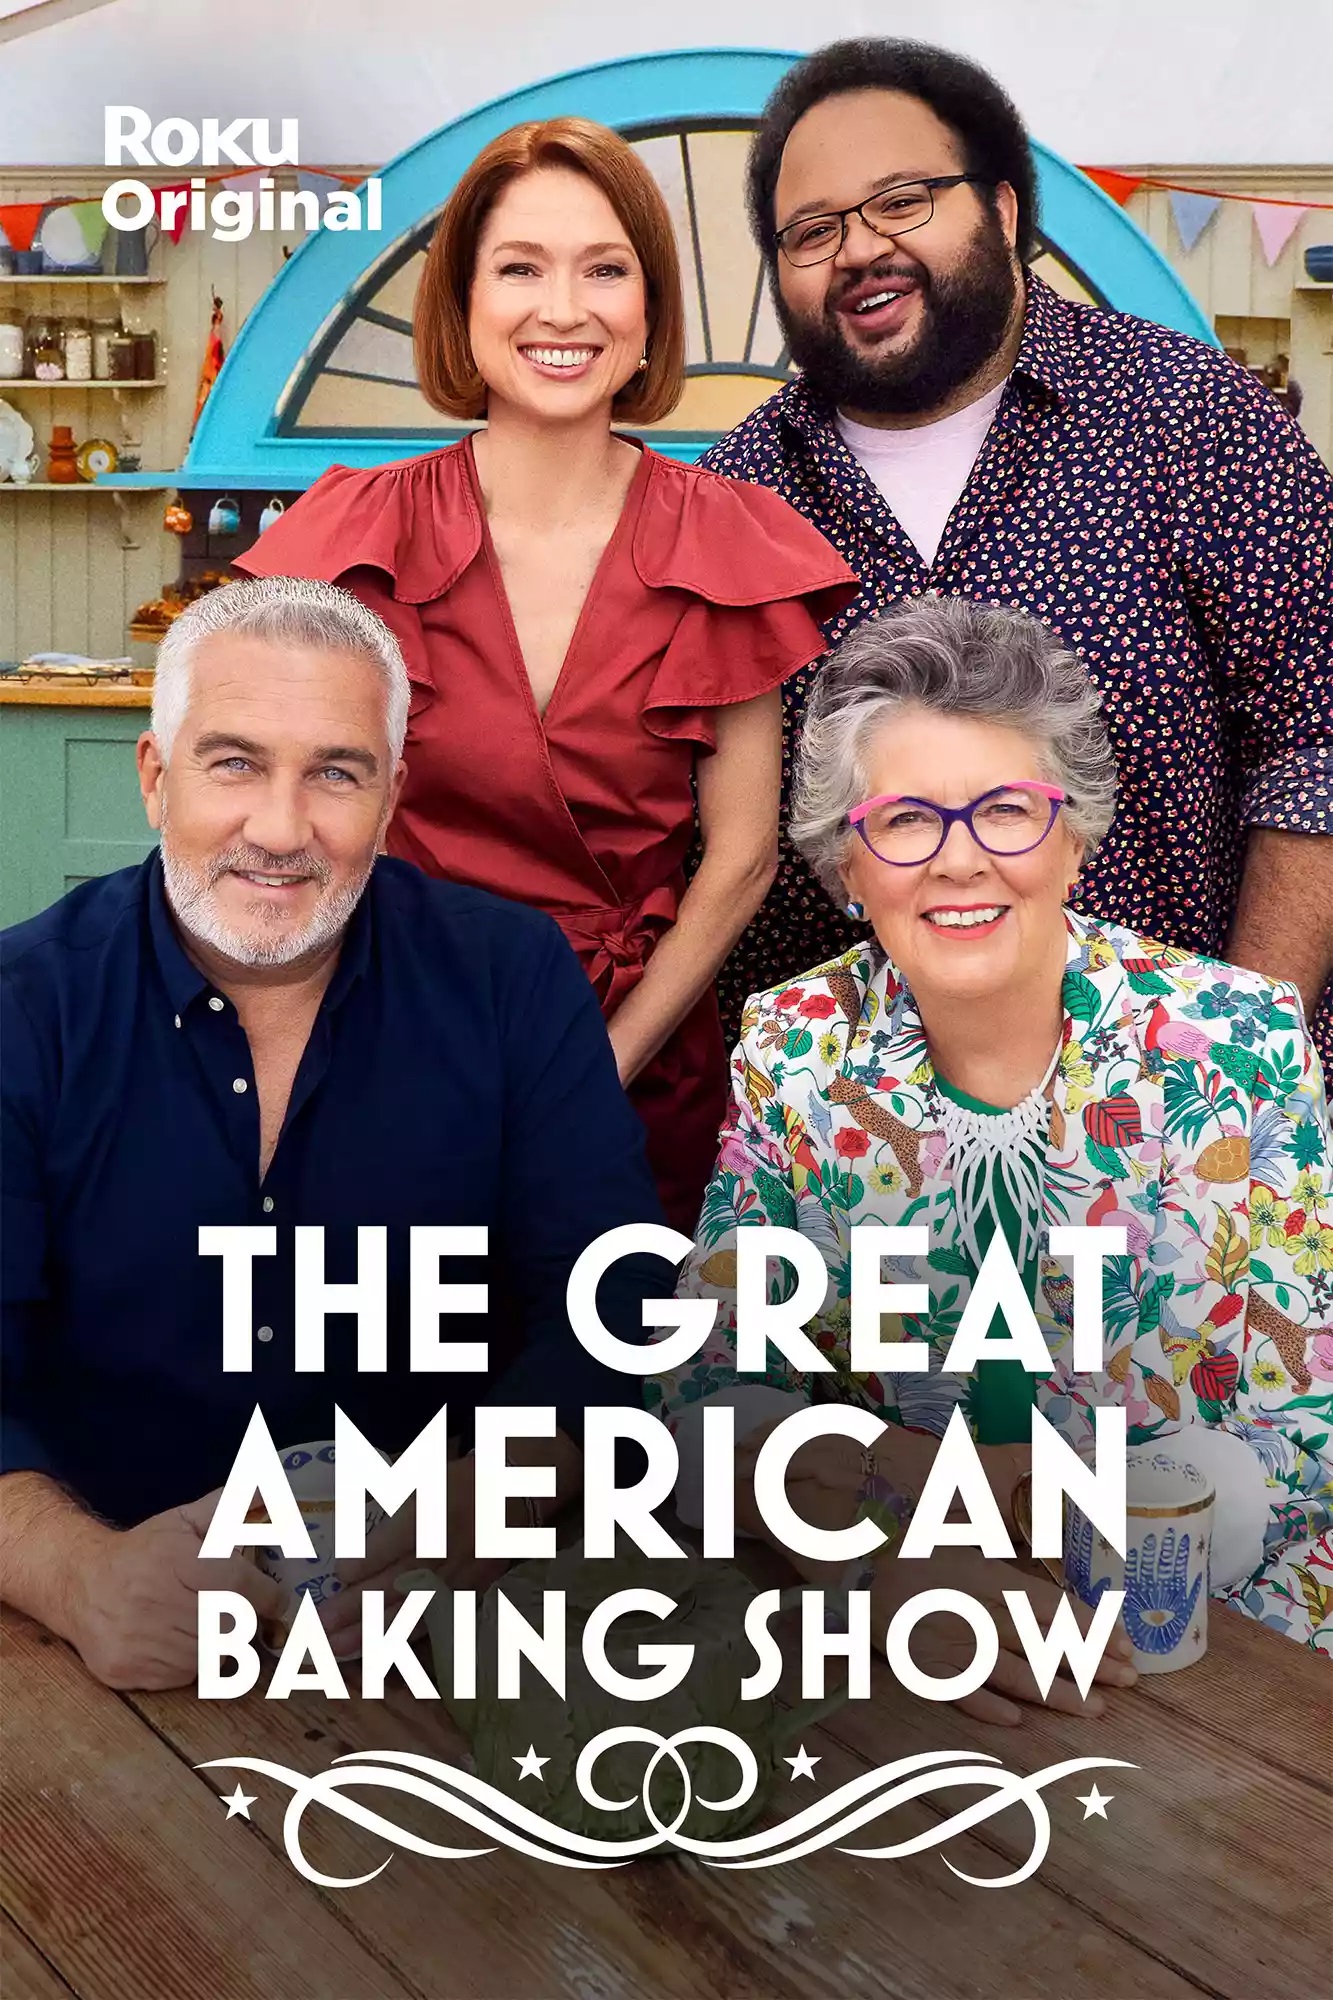 The Great American Baking Show on Roku release date, trailer, bakers